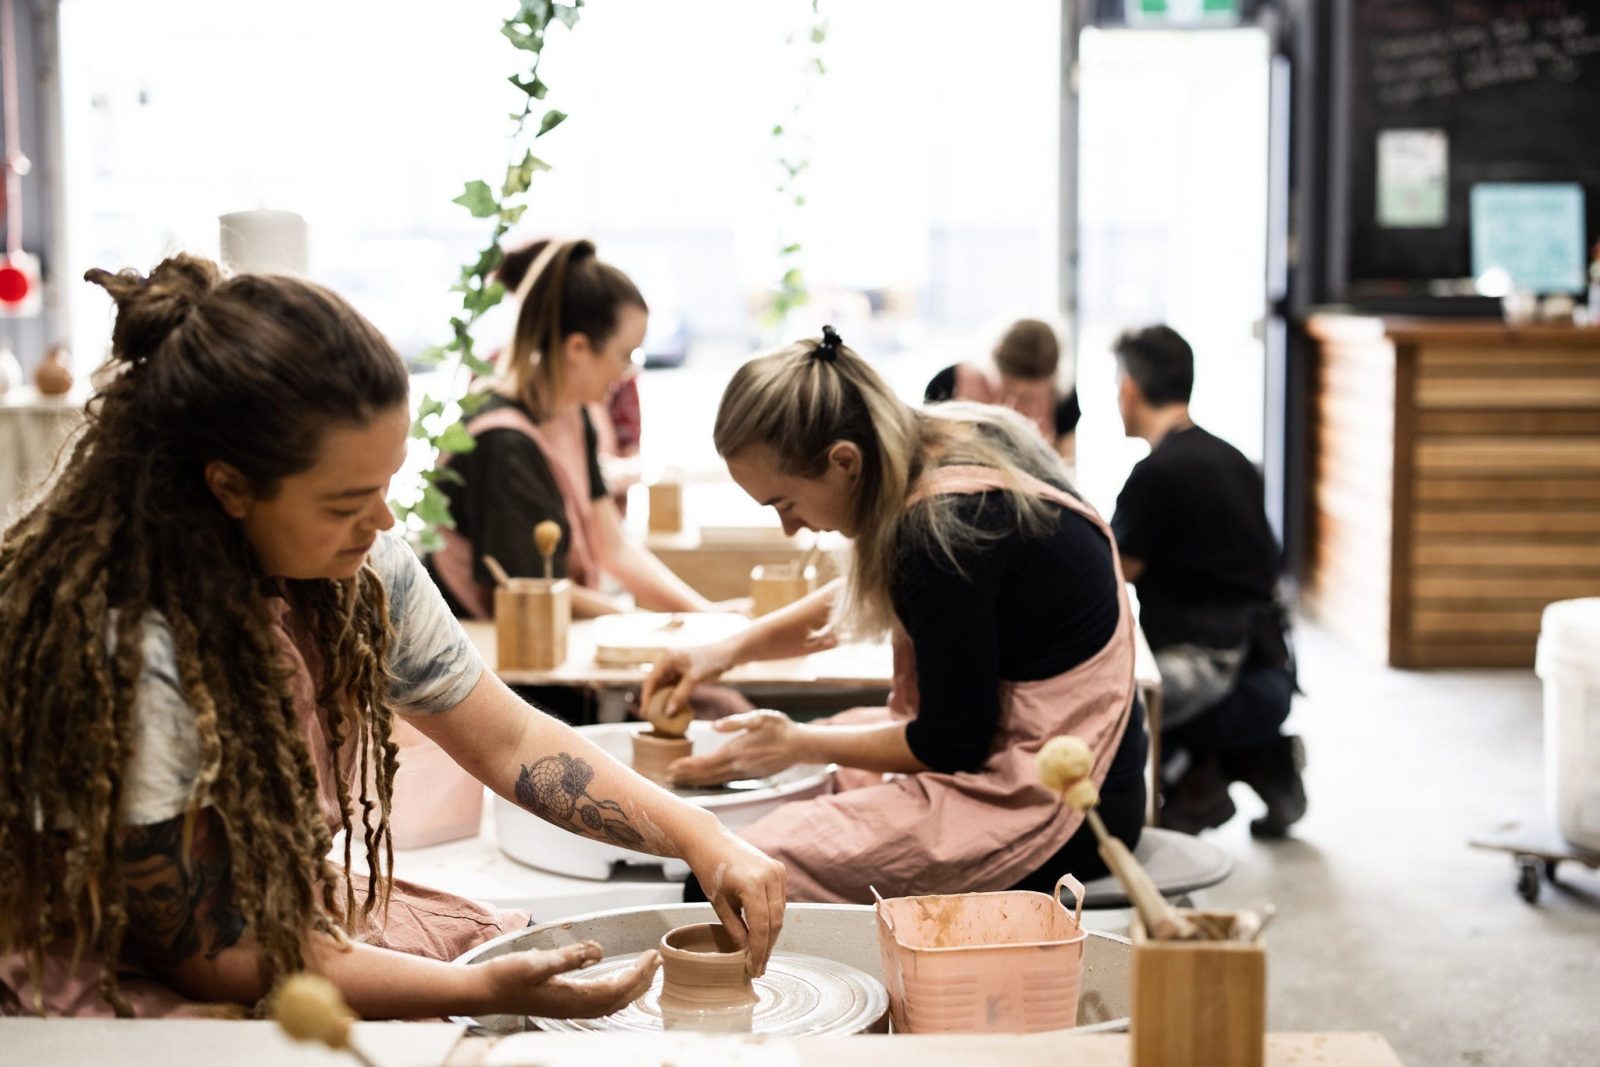 Picture shows a group of people on pottery wheels in a pottery studio